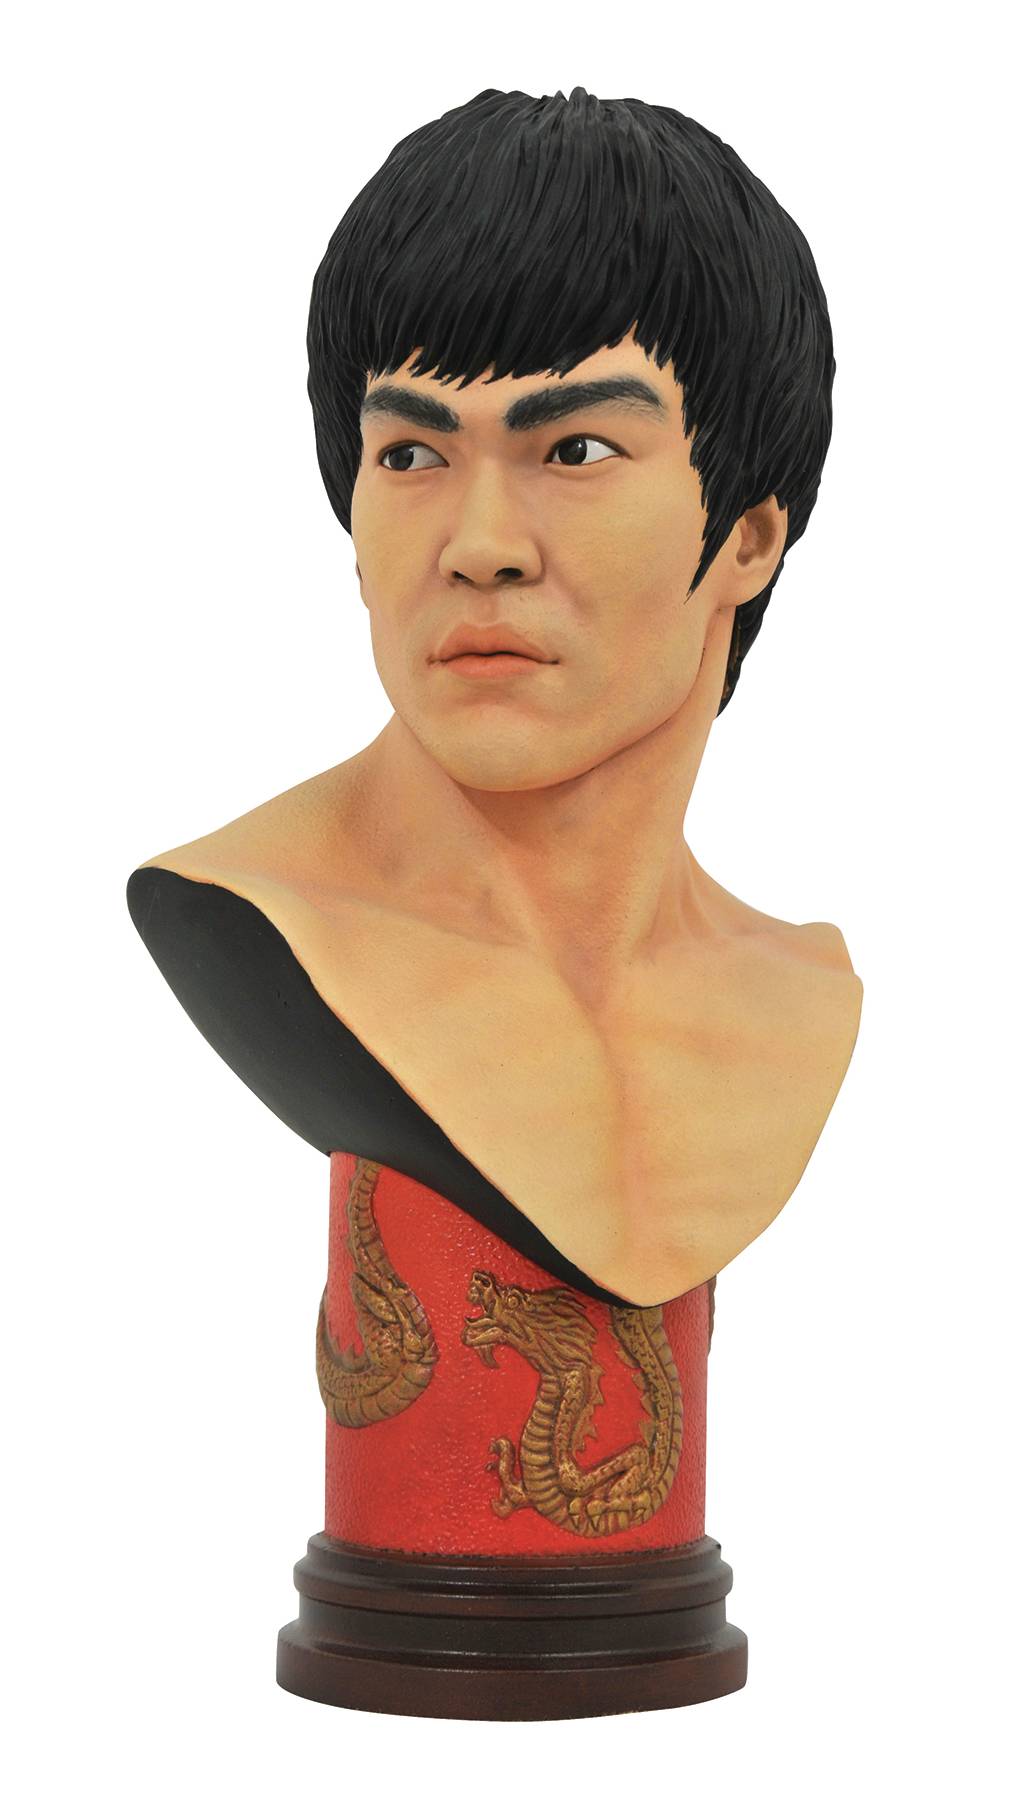 BRUCE LEE LEGENDS IN 3D BRUCE LEE 1/2 SCALE BUST